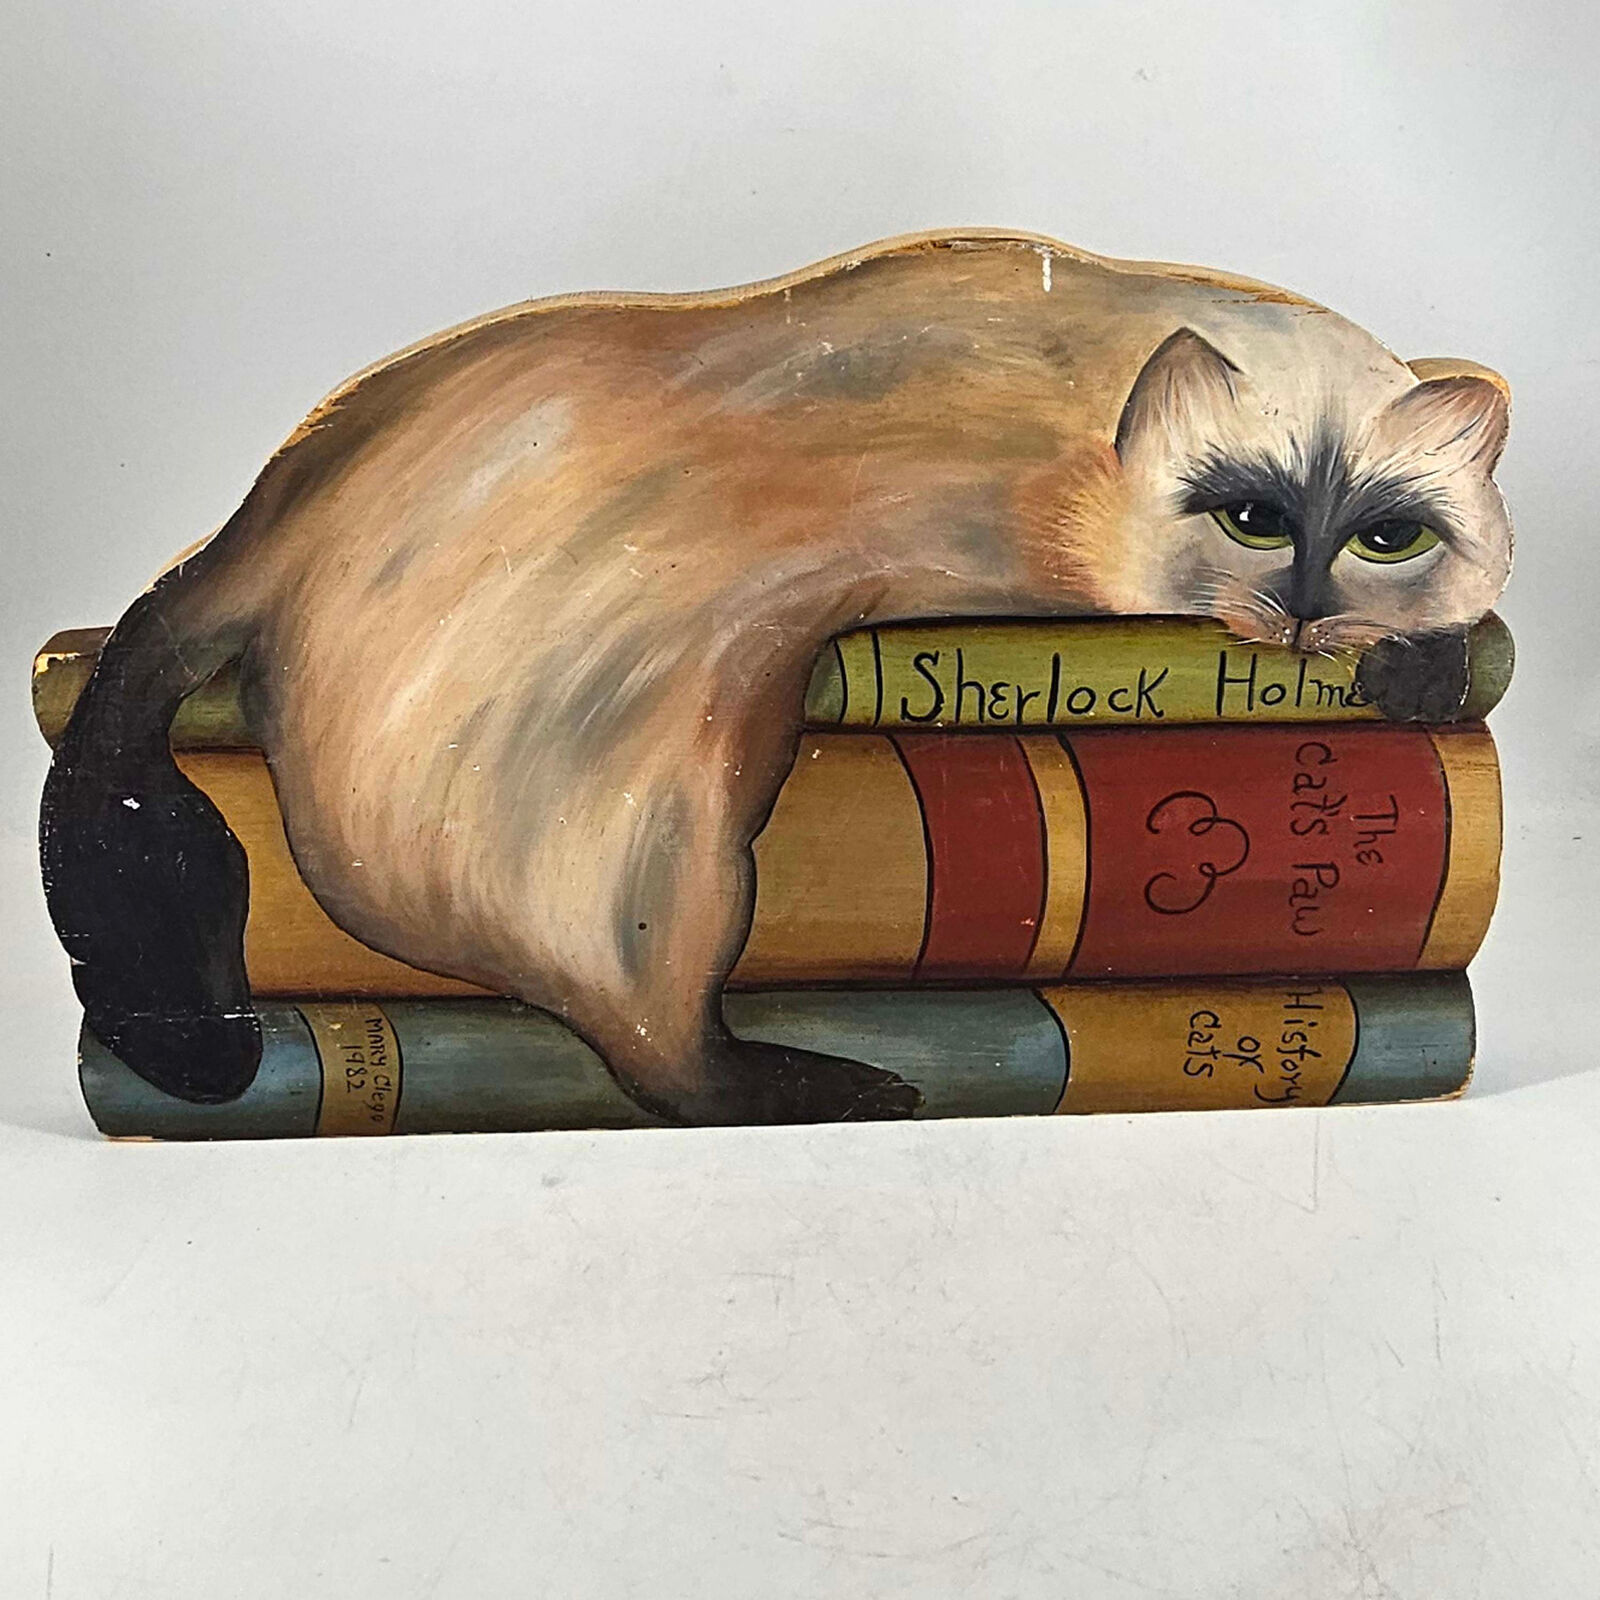 Vintage long haired chubby cat lounging books hand painted on wood free standing